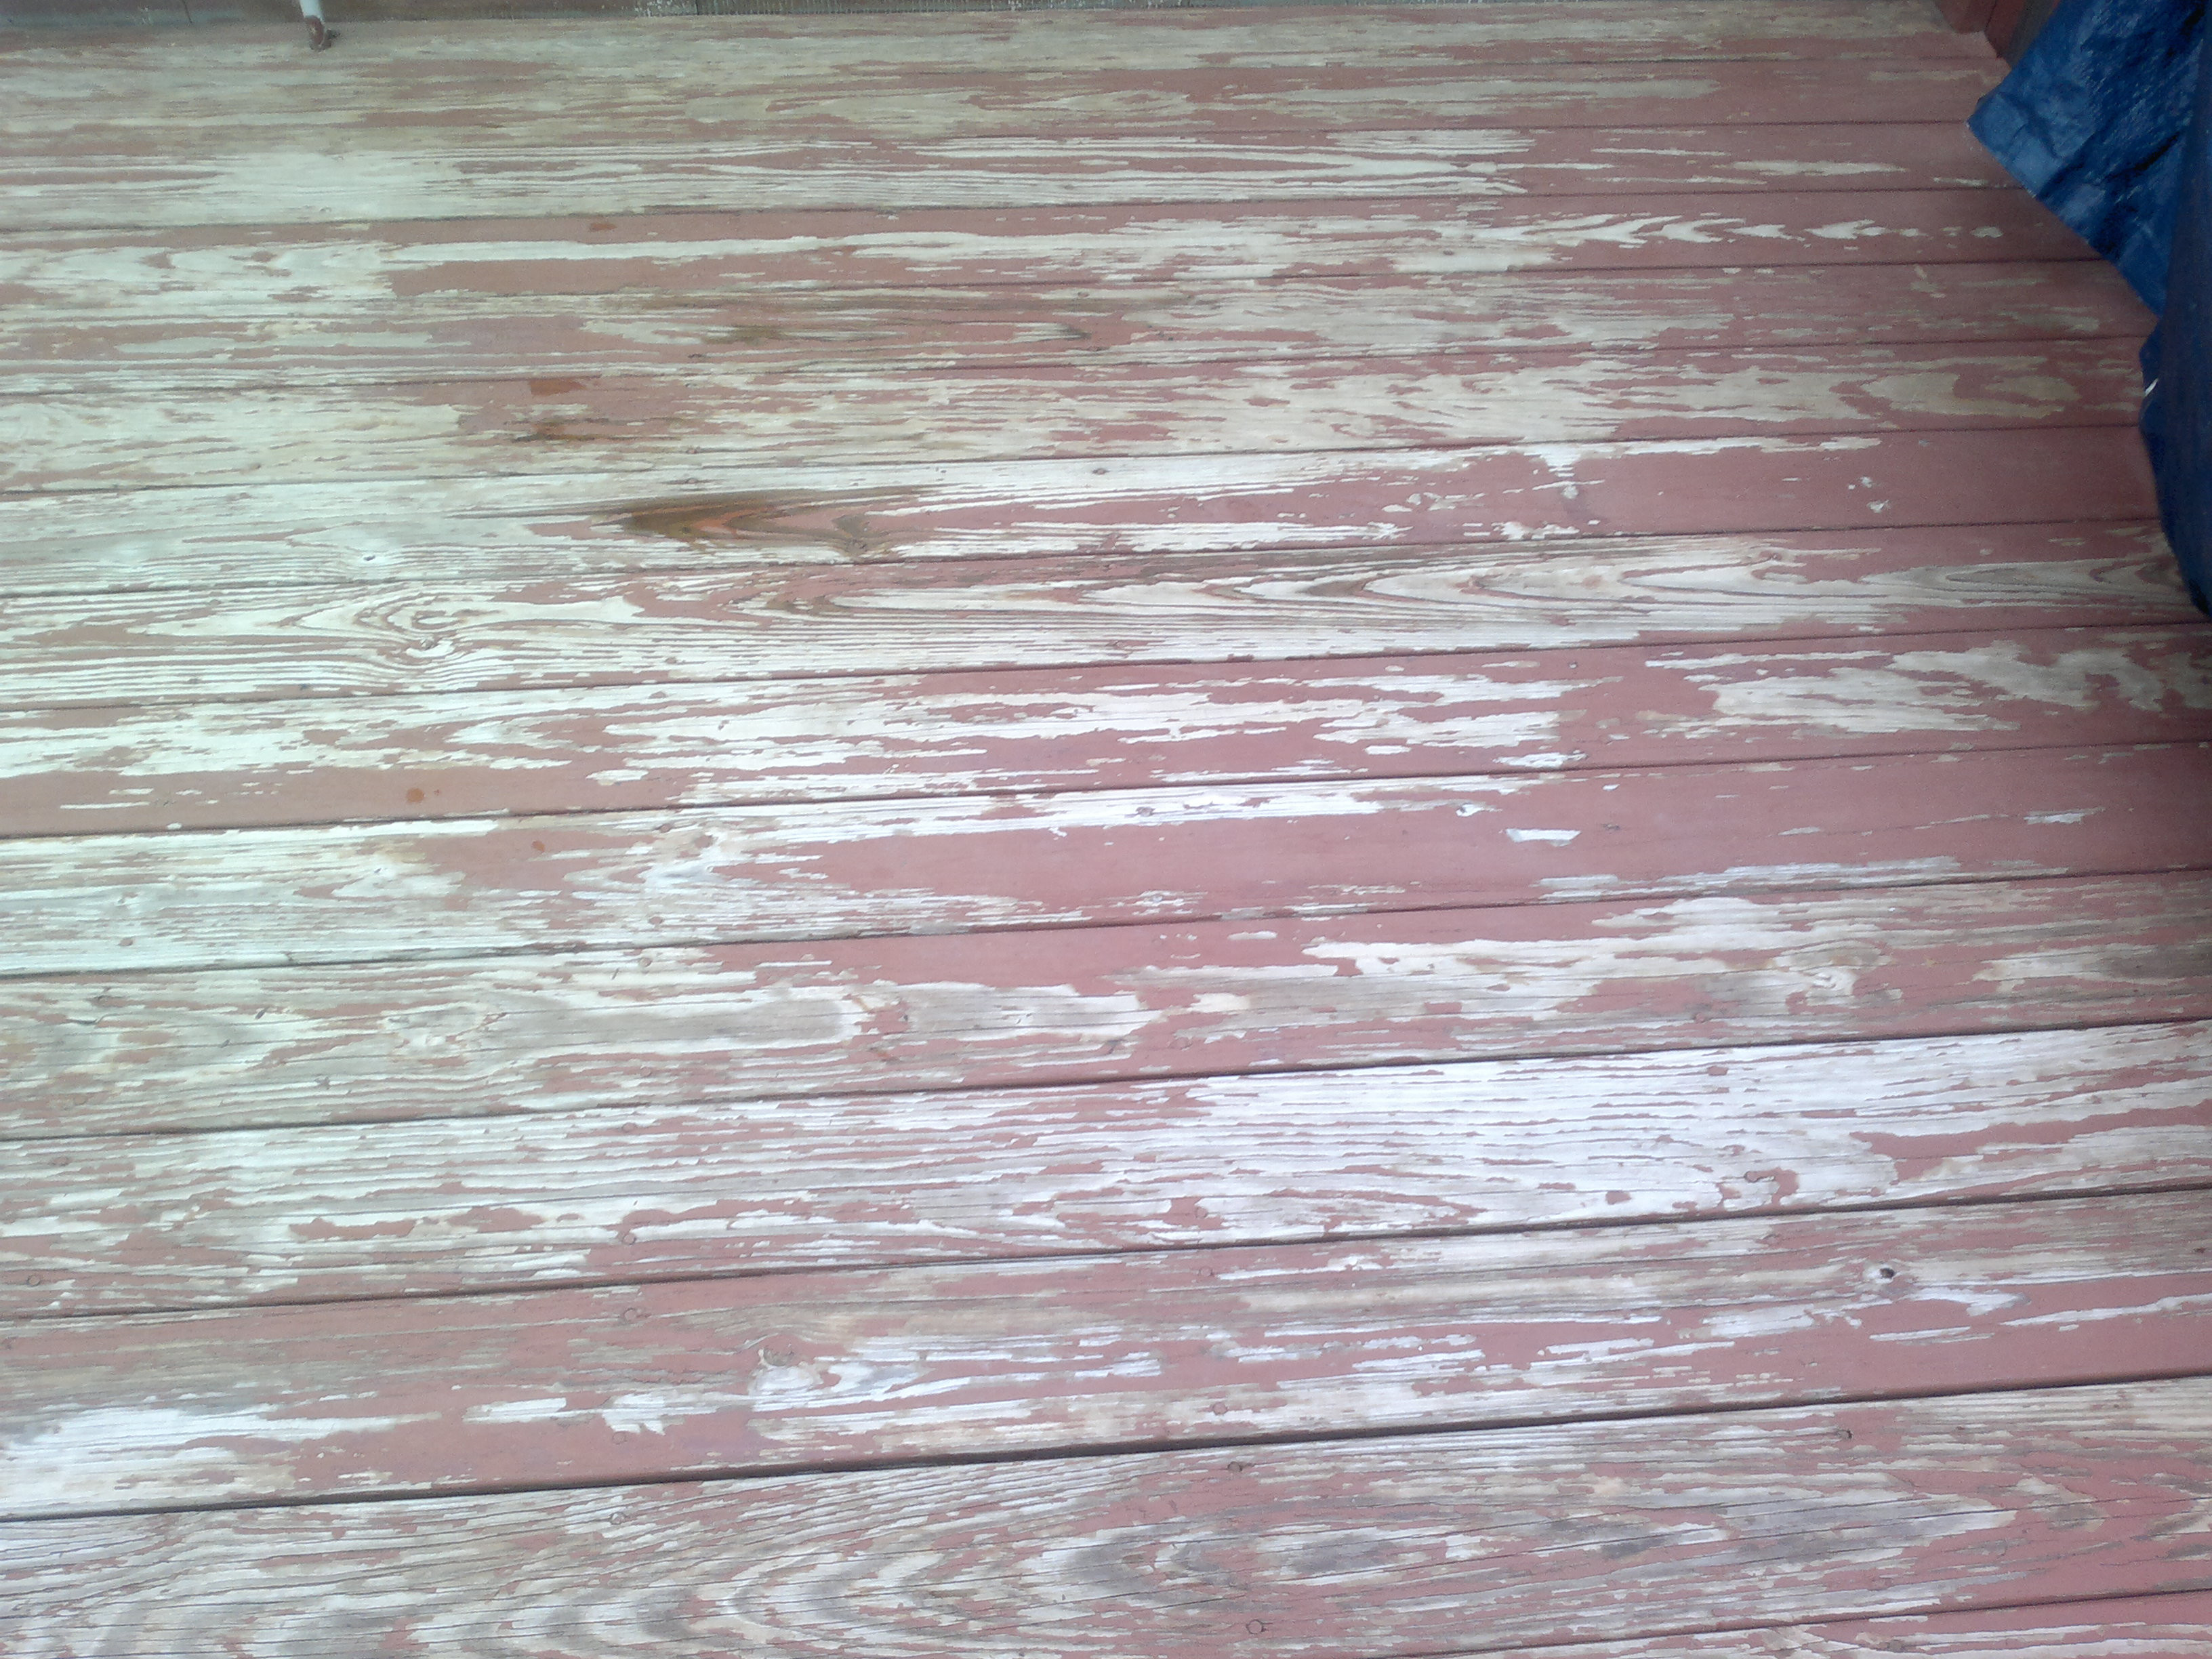 17 Lovable Hardwood Floor Stain Not Drying 2022 free download hardwood floor stain not drying of best stain for an old deck best deck stain reviews ratings with 040520111781